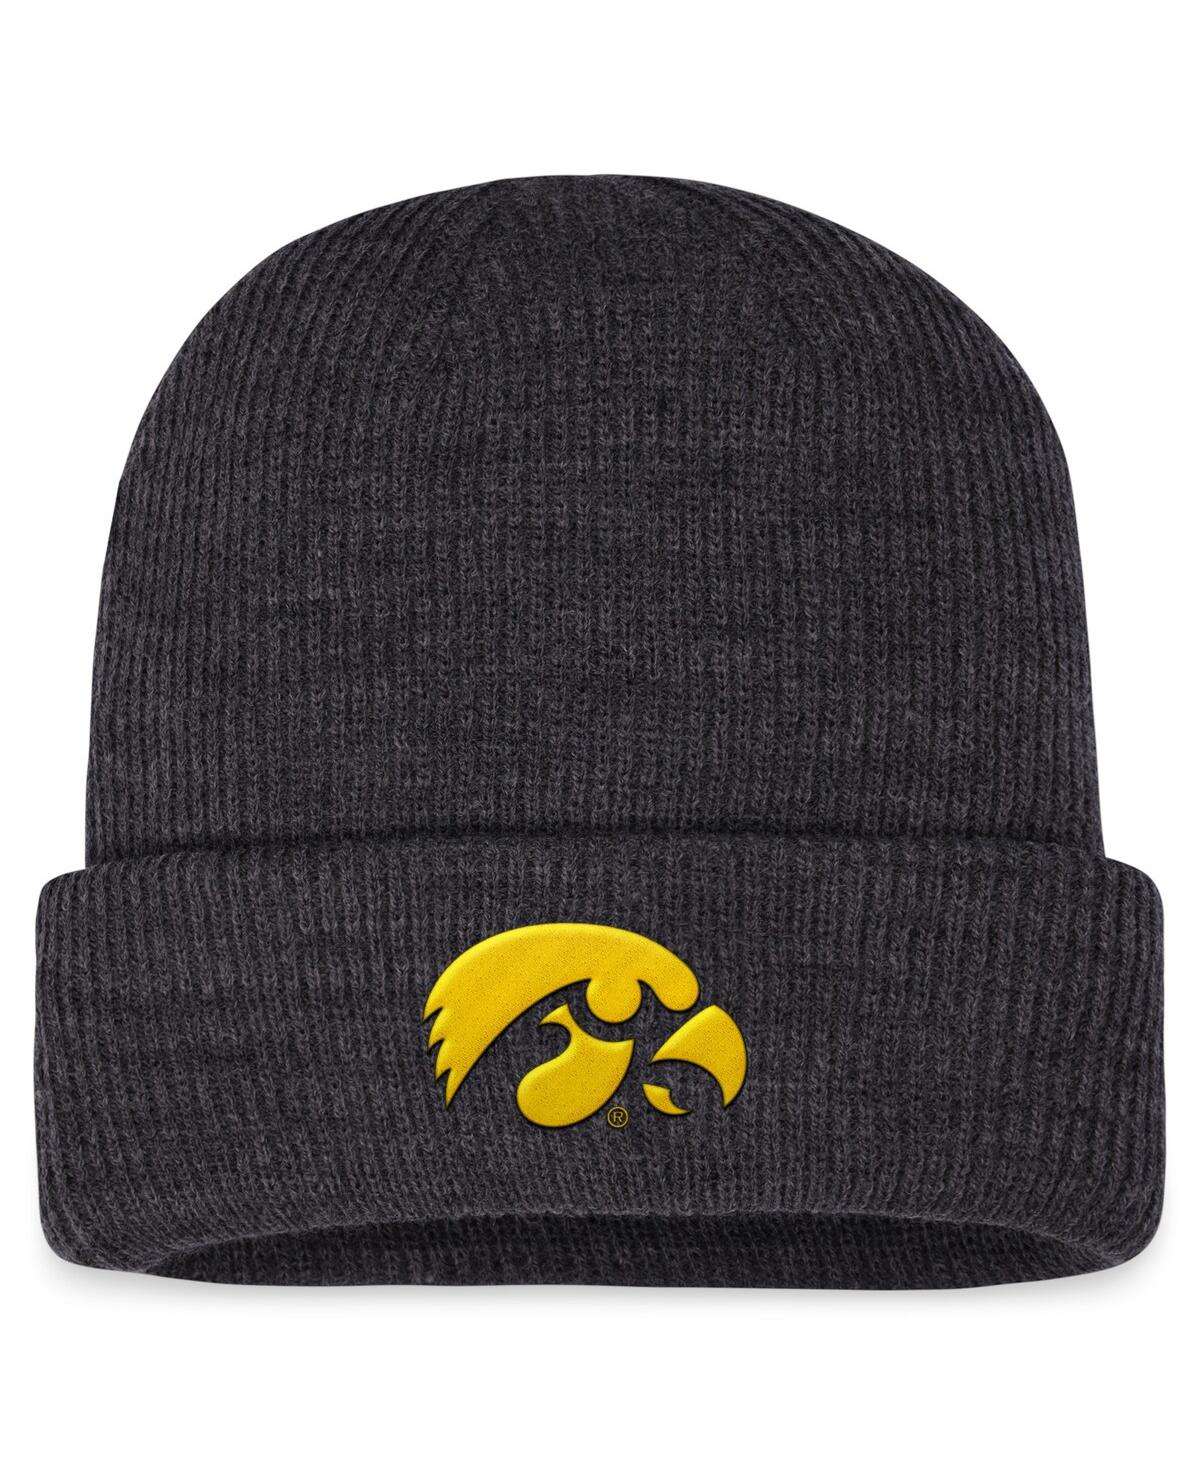 Top Of The World Men's  Charcoal Iowa Hawkeyes Sheer Cuffed Knit Hat